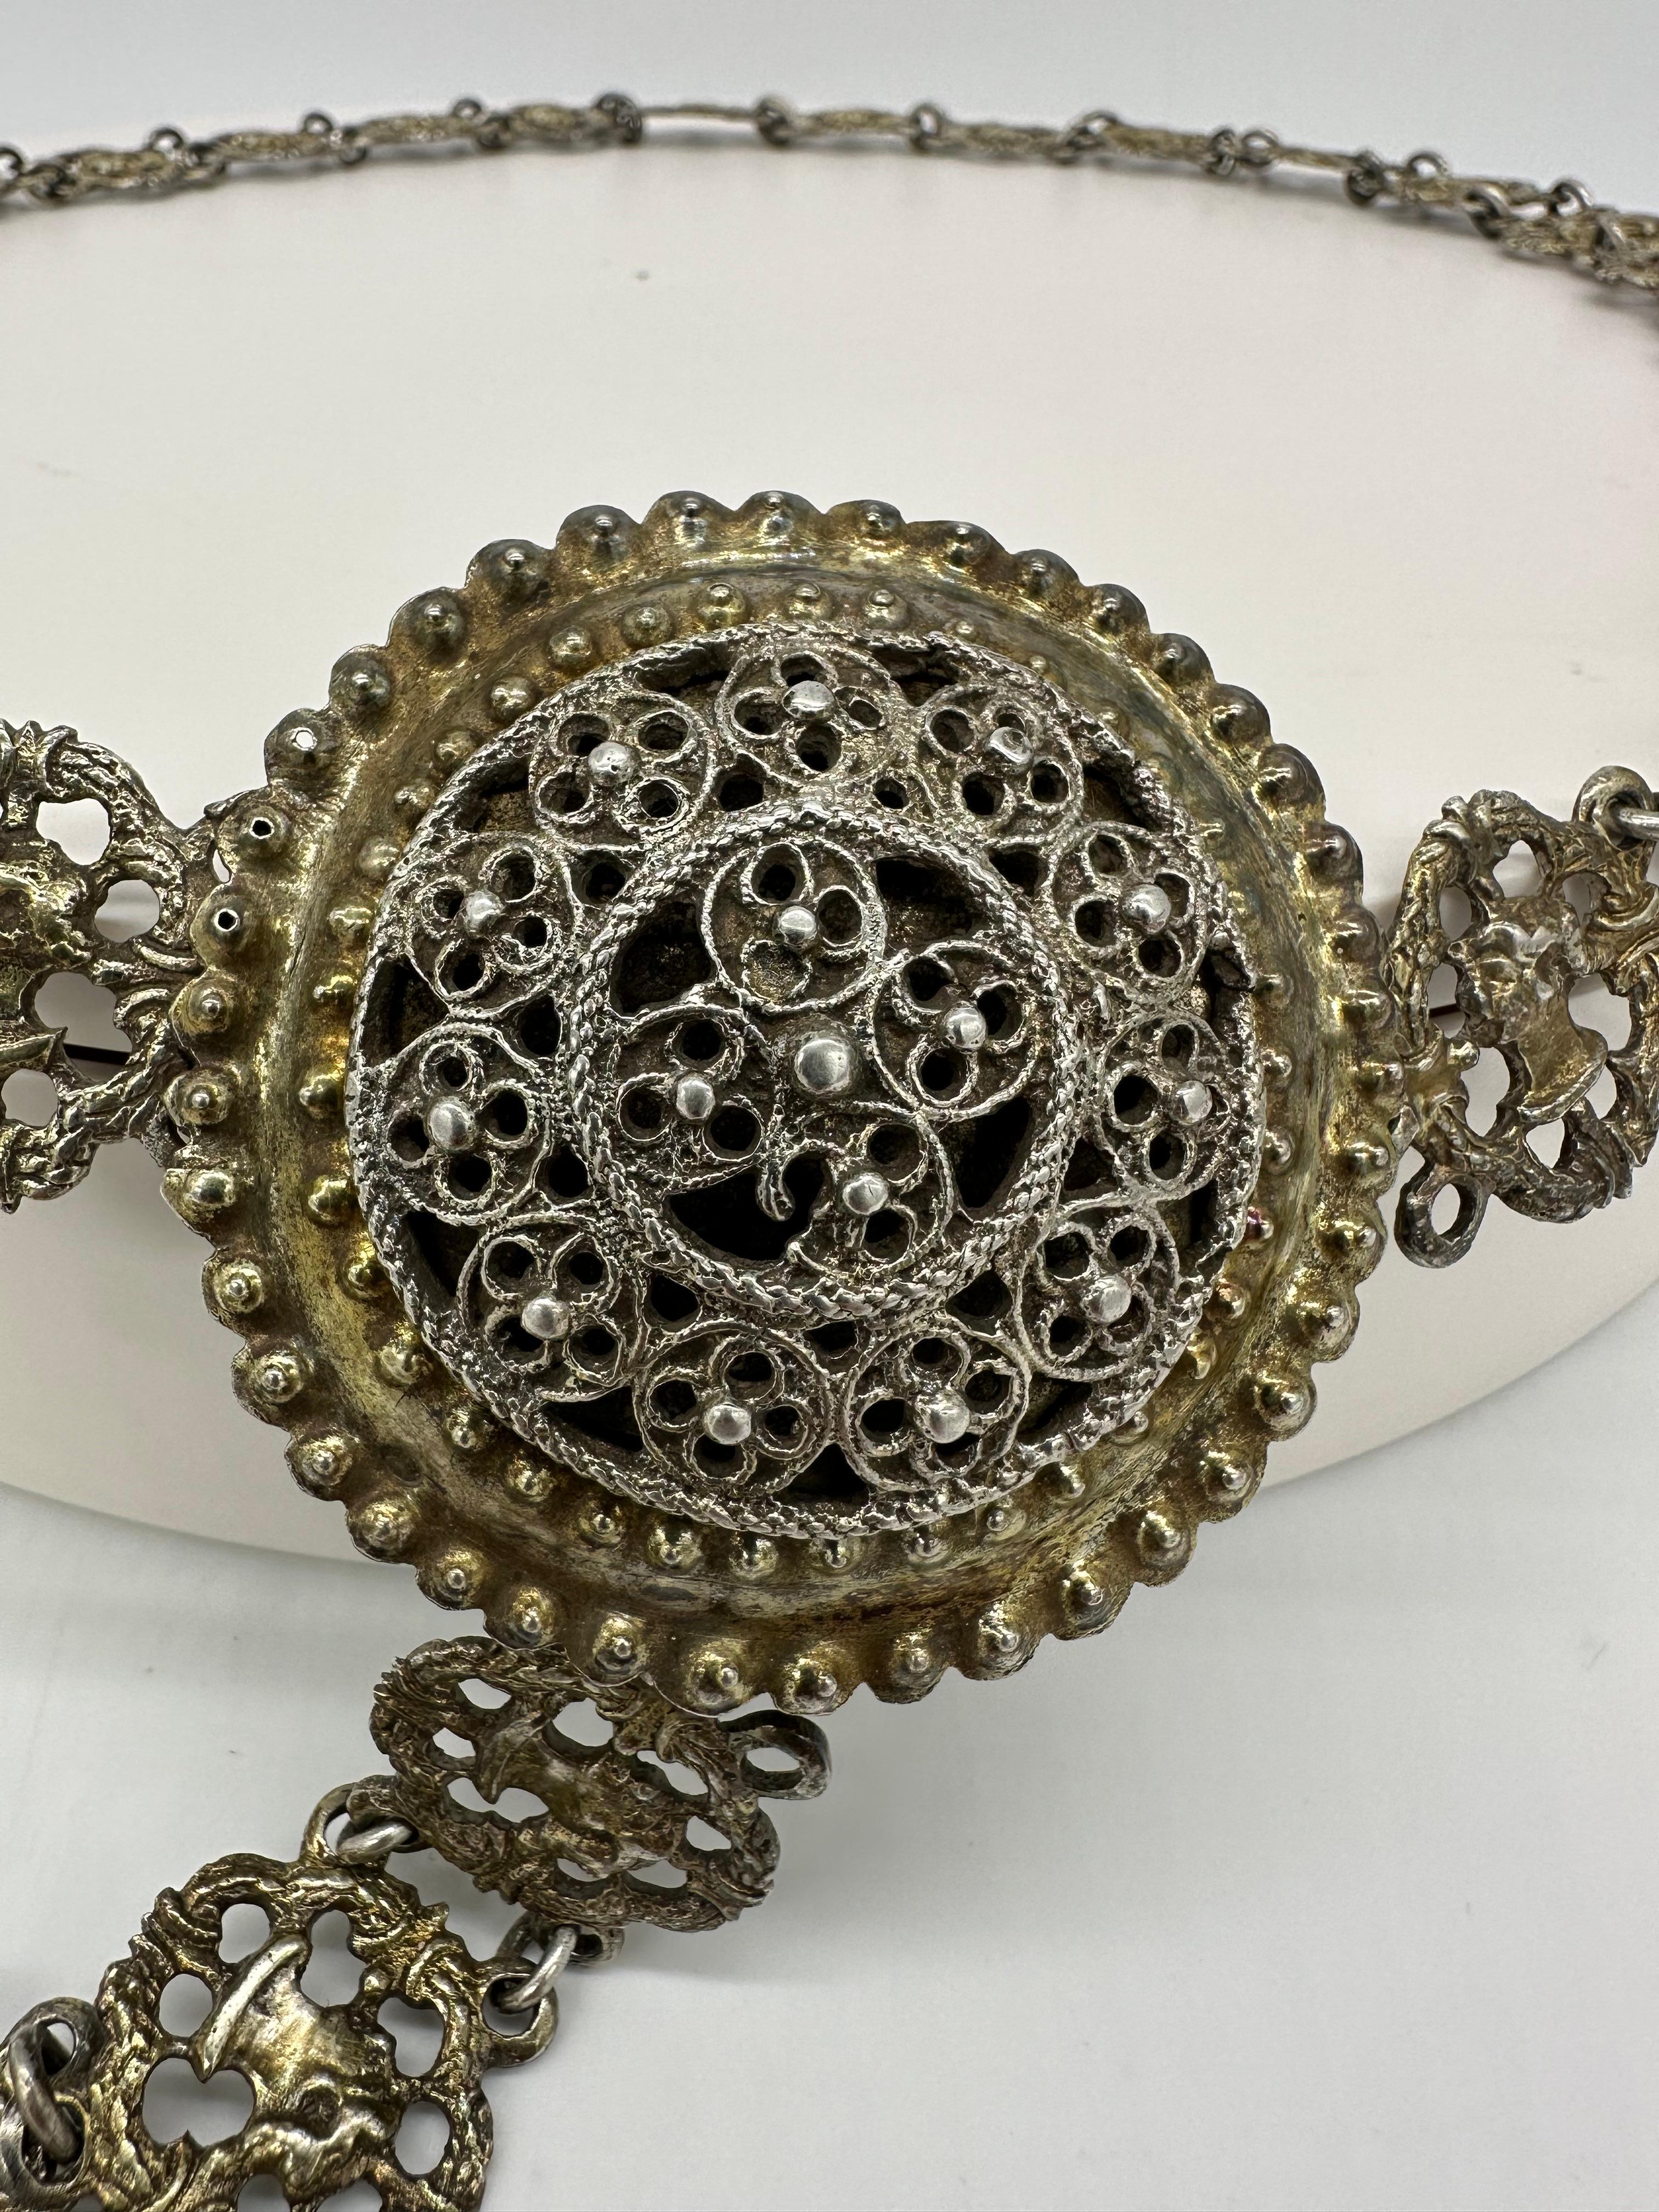 Important and rare Sivlonot belt, gilded silver, made by the famous silversmith Johann Mathias Sandrat active in 1707-1723 in Frankfurt, Germany. this JUDAICA object is a museum piece and An almost identical belt with a replaced buckle is exhibited